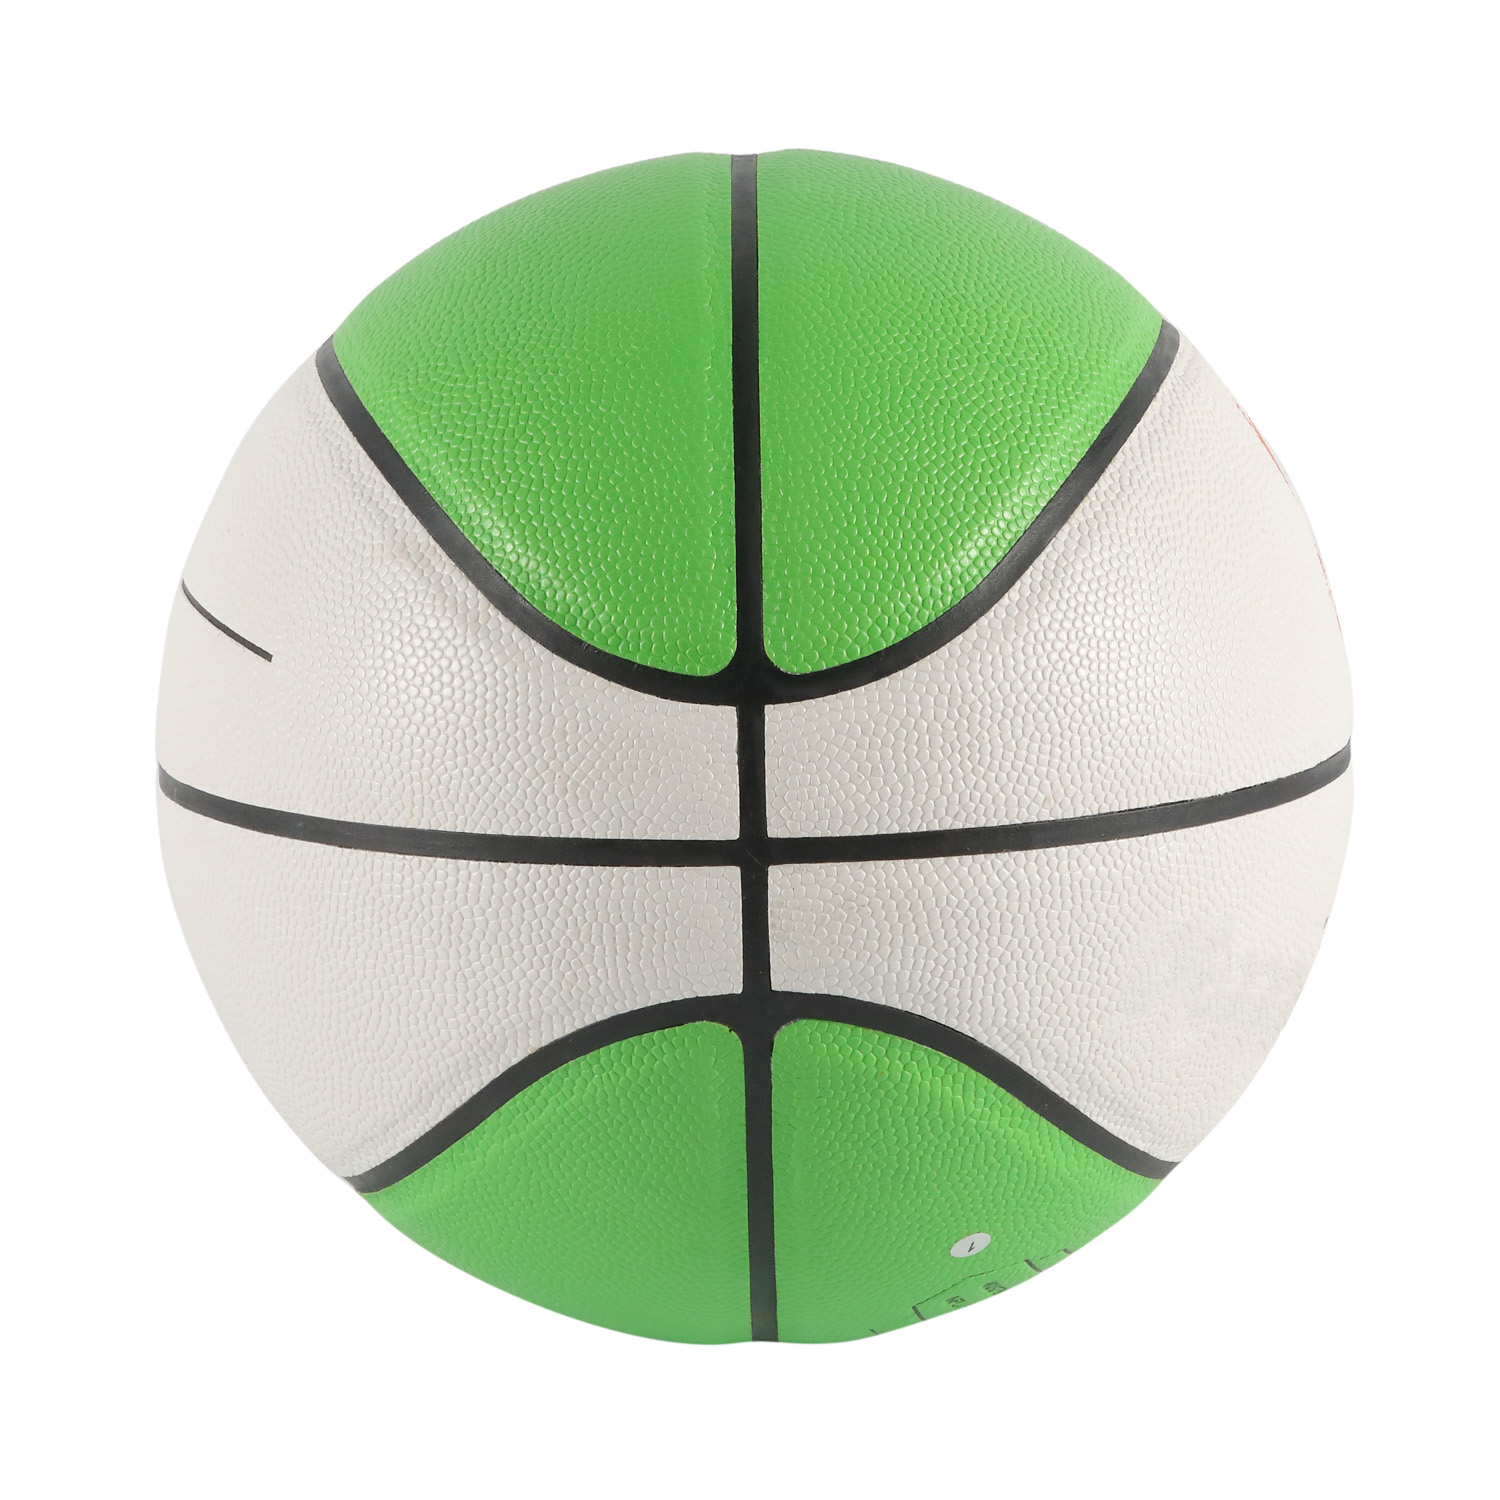 Official Size Laminated Basketball Play PU Cover